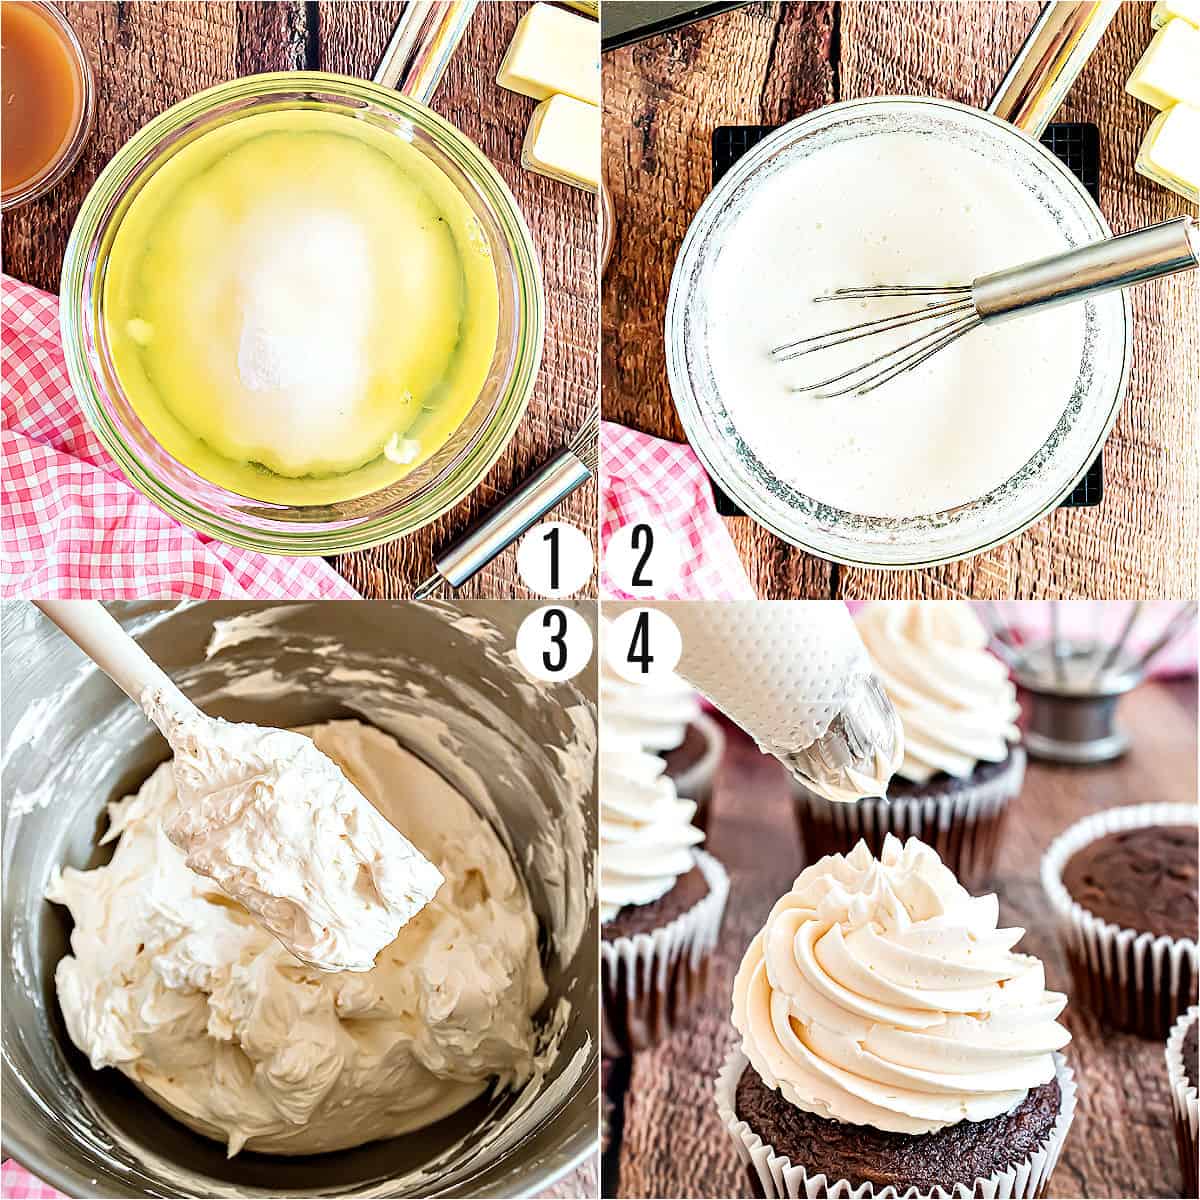 Step by step photos showing how to make swiss meringue frosting.